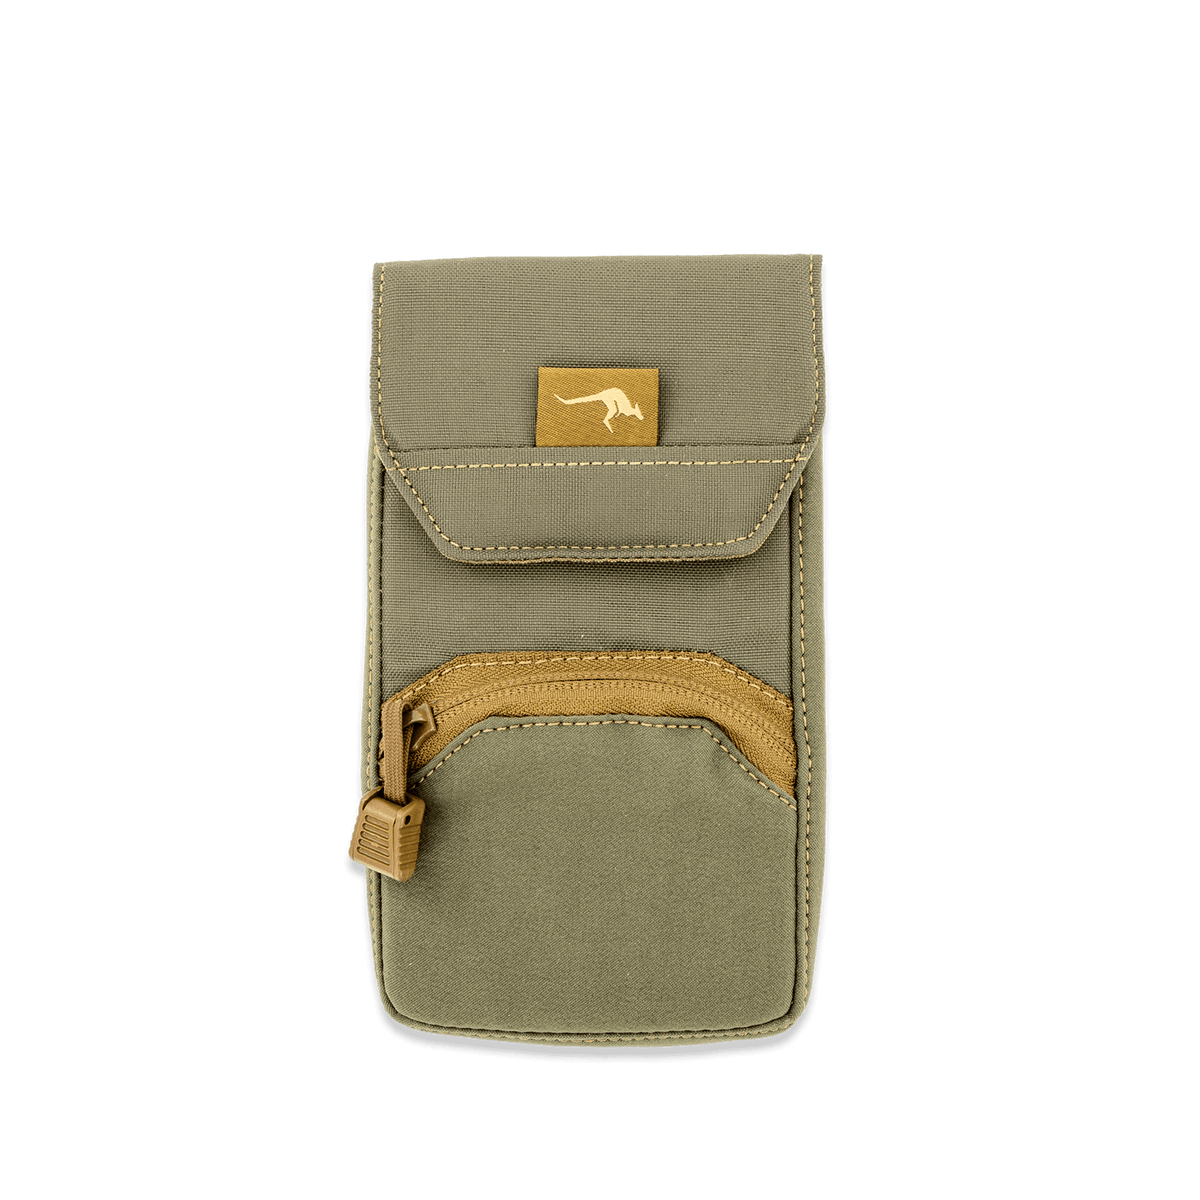 COOL® PHONE POUCH WITH CROSSBODY STRAP – #CreateOutOfLove